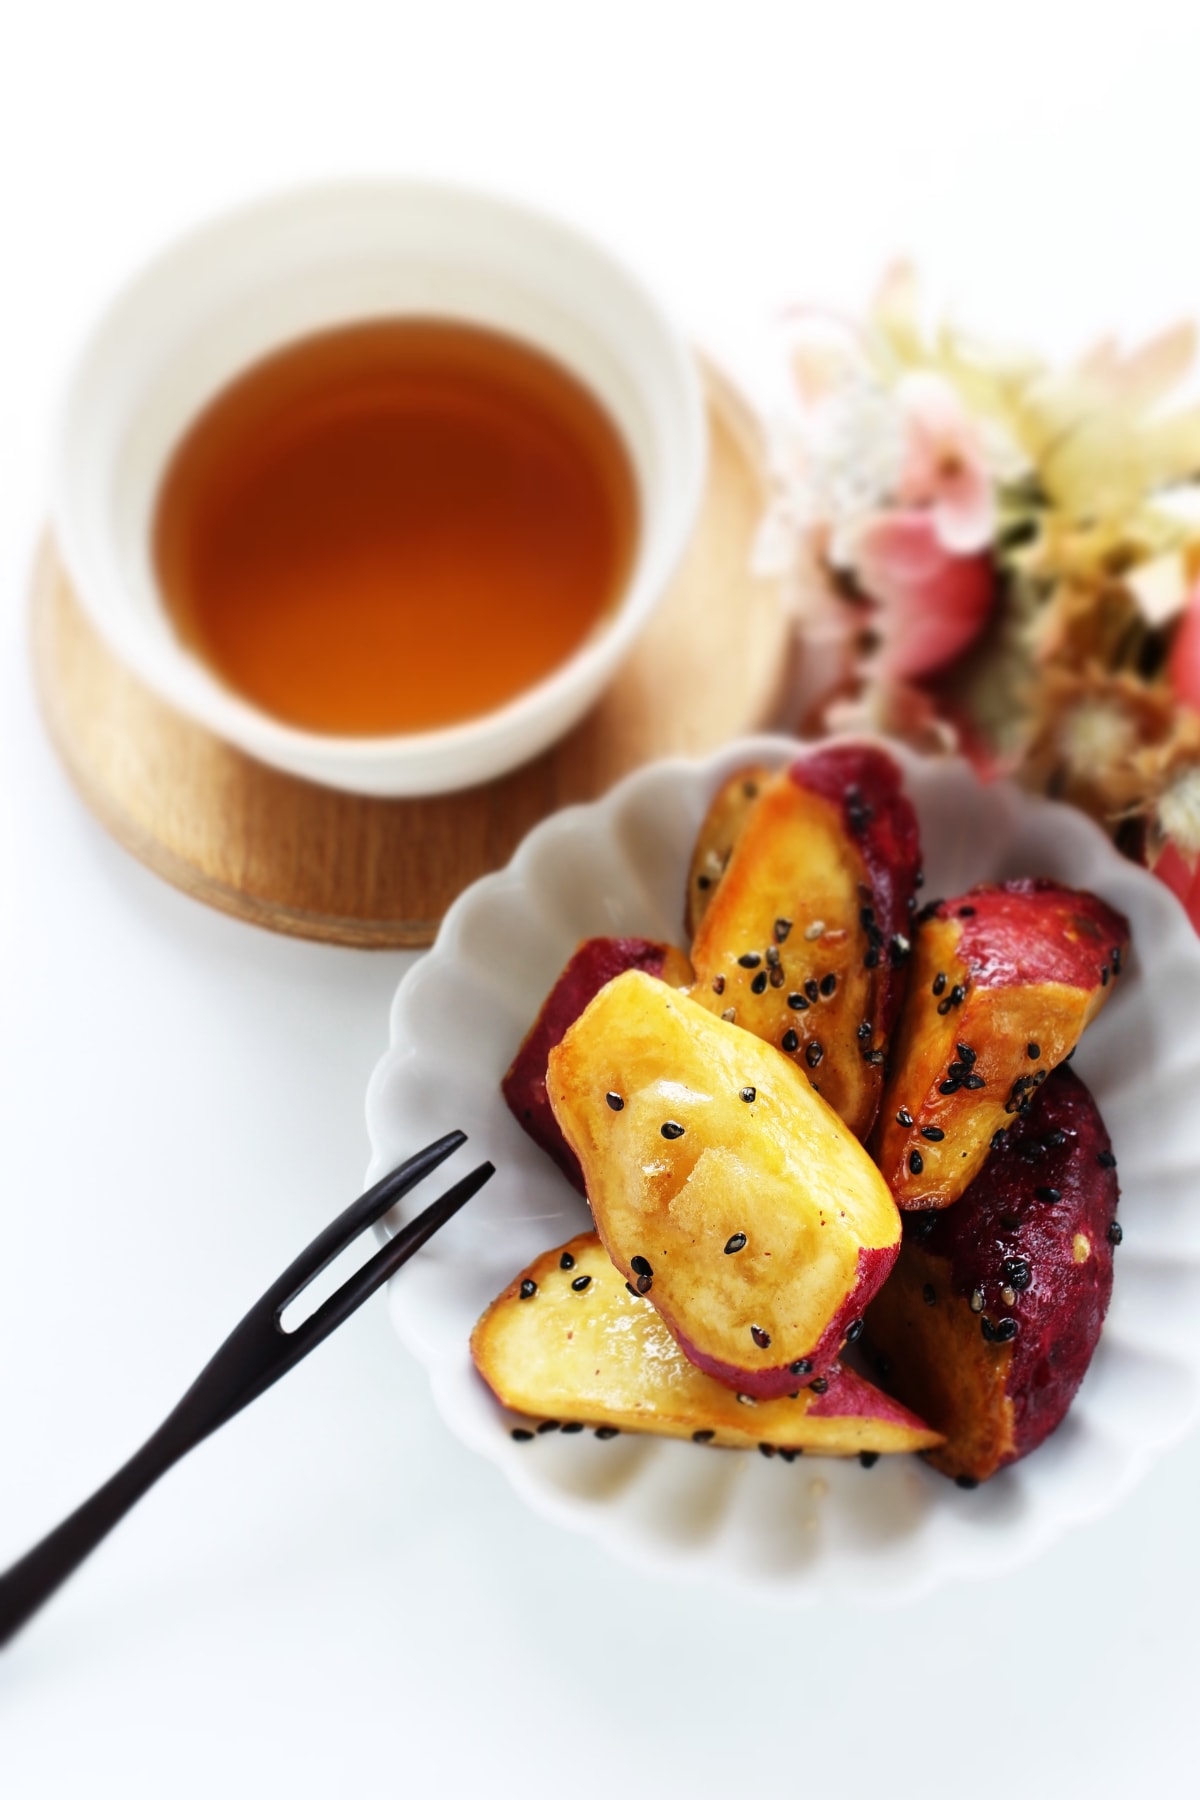 13 Best Japanese Sweet Potato Recipes featuring Homemade Japanese sweet potato with sesame seeds served with roasted barley tea